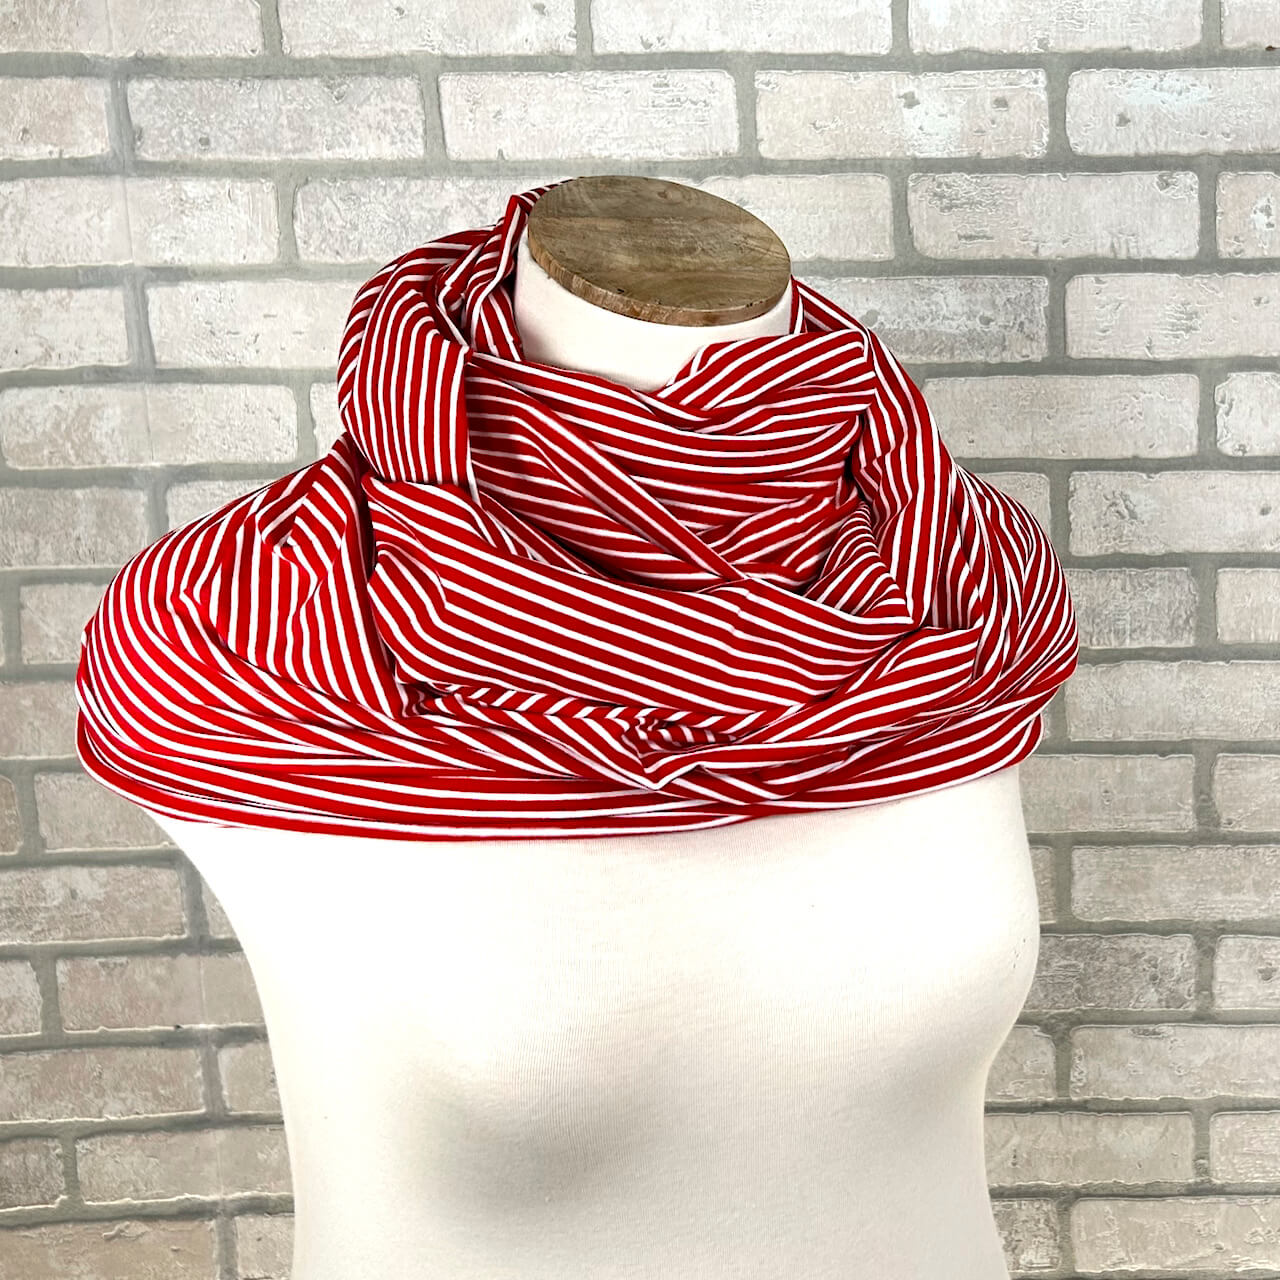 Cowl Neck One-Seam Serger Scarf Sewing Tutorial by The Stitch it! Sisters at The Nancy Zieman Productions Blog